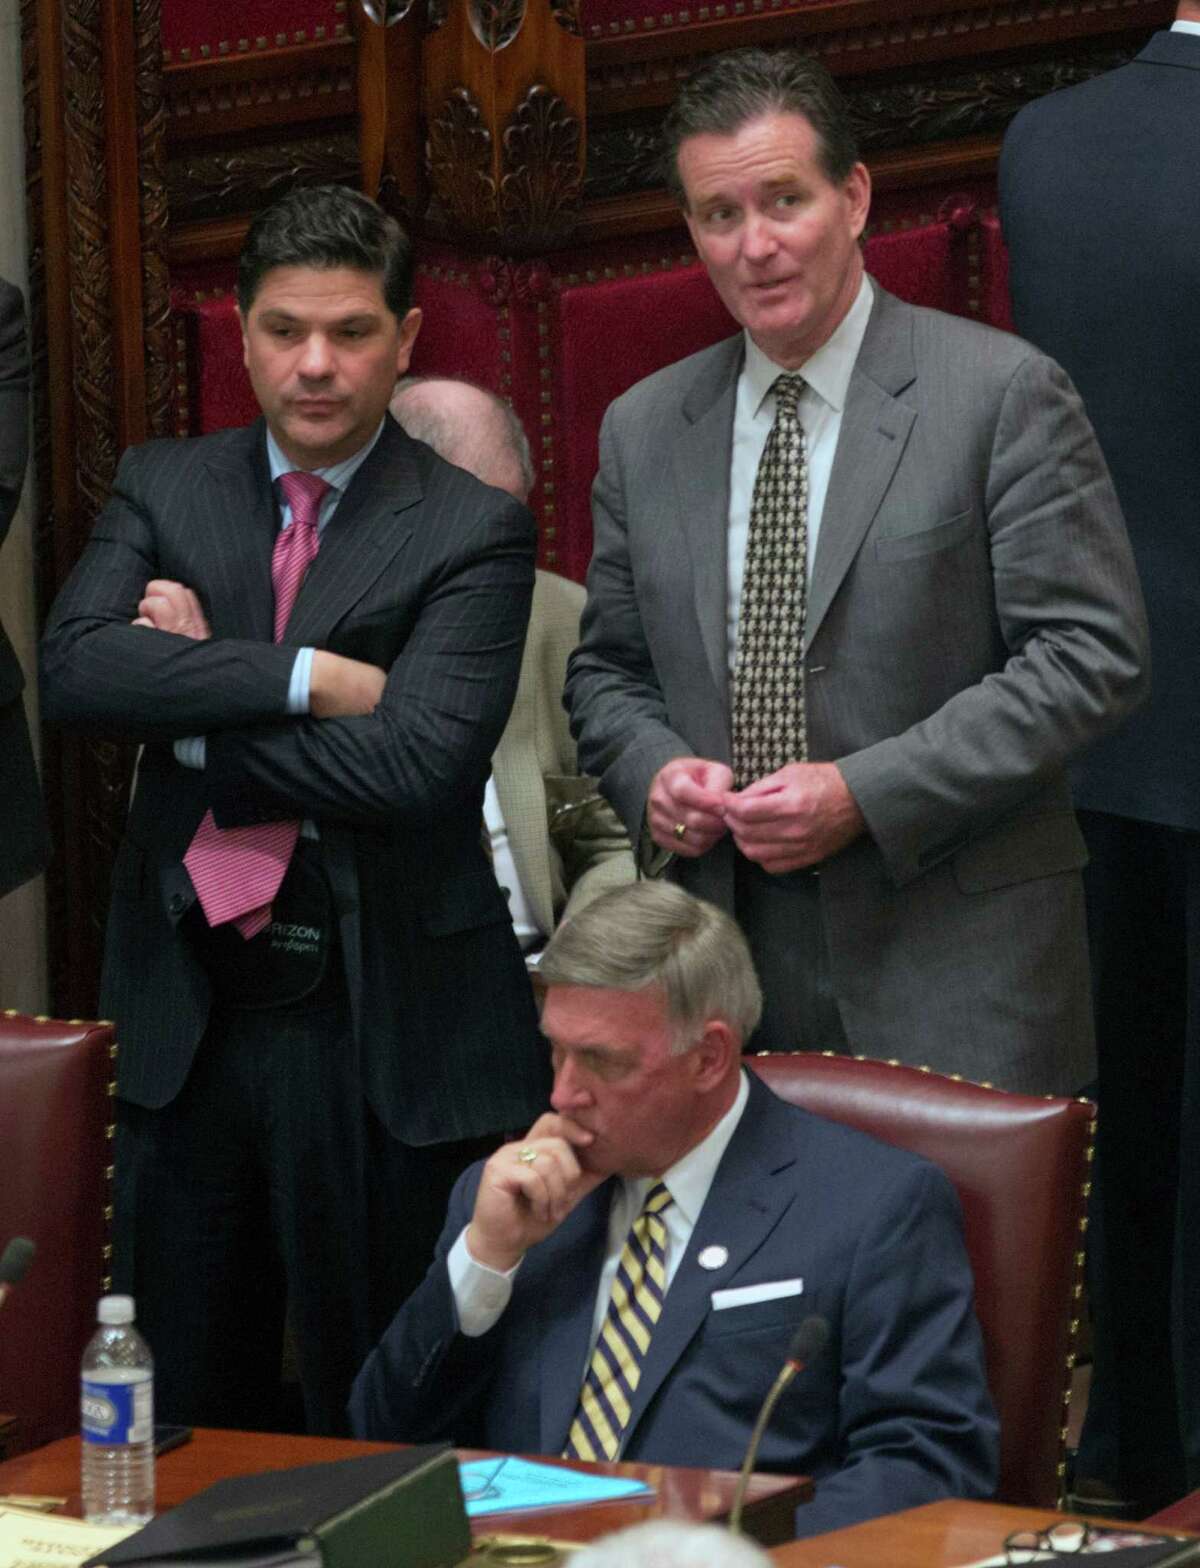 Sen. John Flanagan, R-Smithtown, right, talks with Sen. George Amedore, R-Rotterdam, in the Senate Chamber at the Capitol on Monday, May 4, 2015, in Albany, N.Y. Sen. Rich Funke, R-Fairport, is seated. (AP Photo/Mike Groll) ORG XMIT: NYMG111